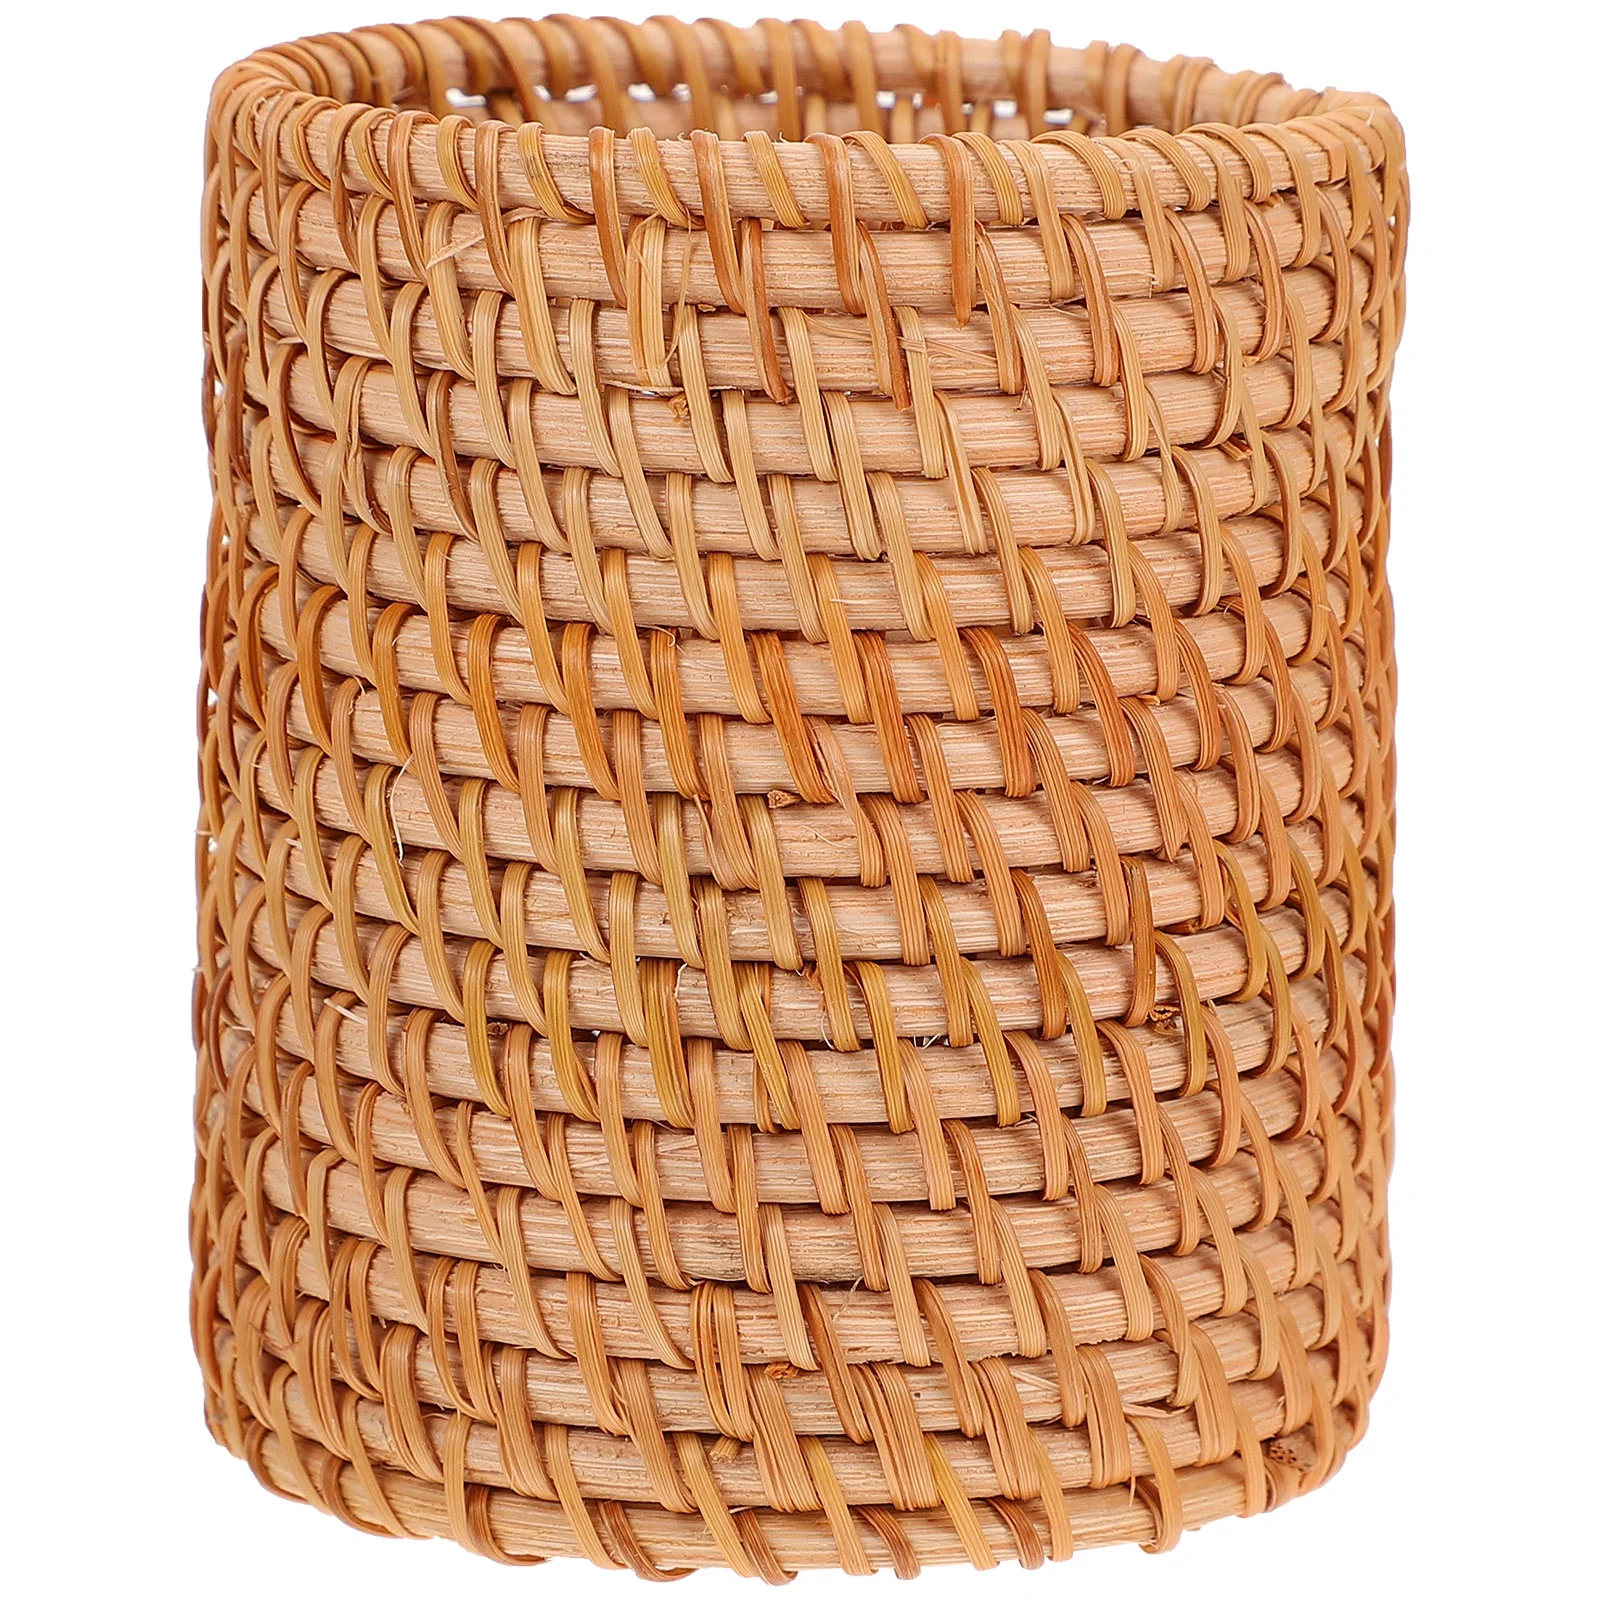 

Rattan Storage Tube Stationary Holder Pen Basket Wood Woven Sundries Container Baskets Indoor